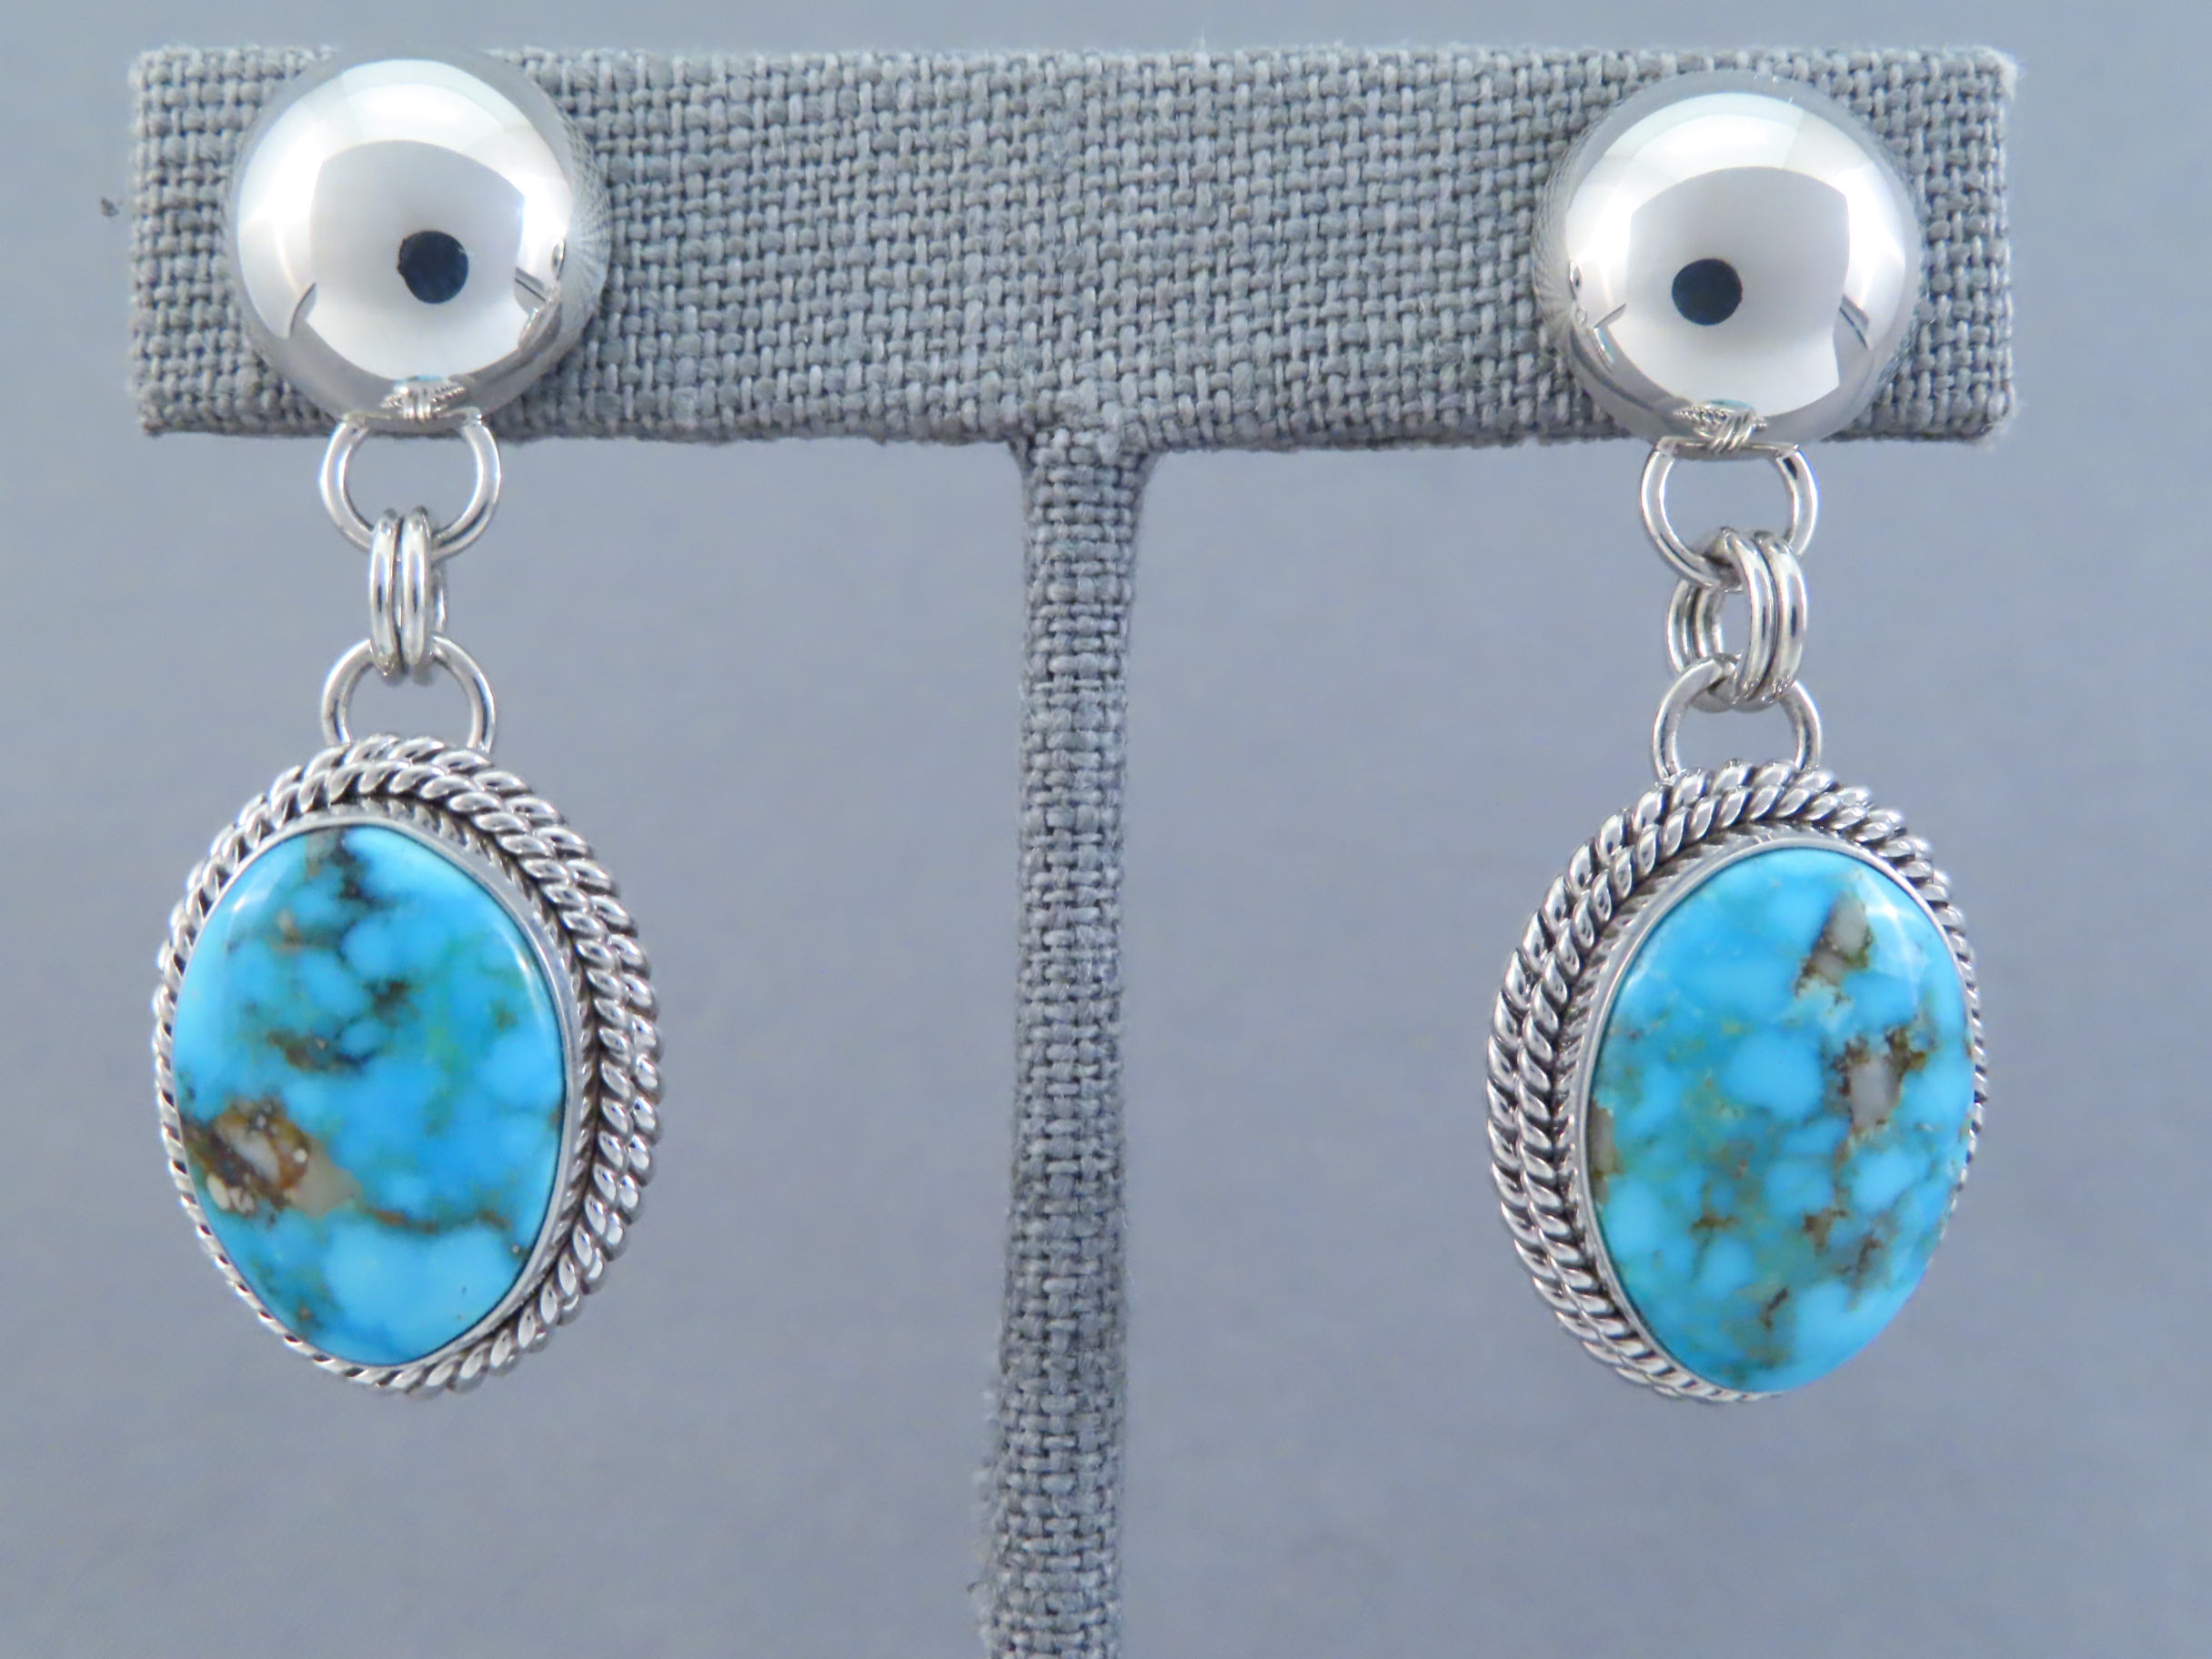 Dangling Post Kingman Turquoise Earrings by Native American Navajo Indian jewelry artist, Artie Yellowhorse FOR SALE $375-